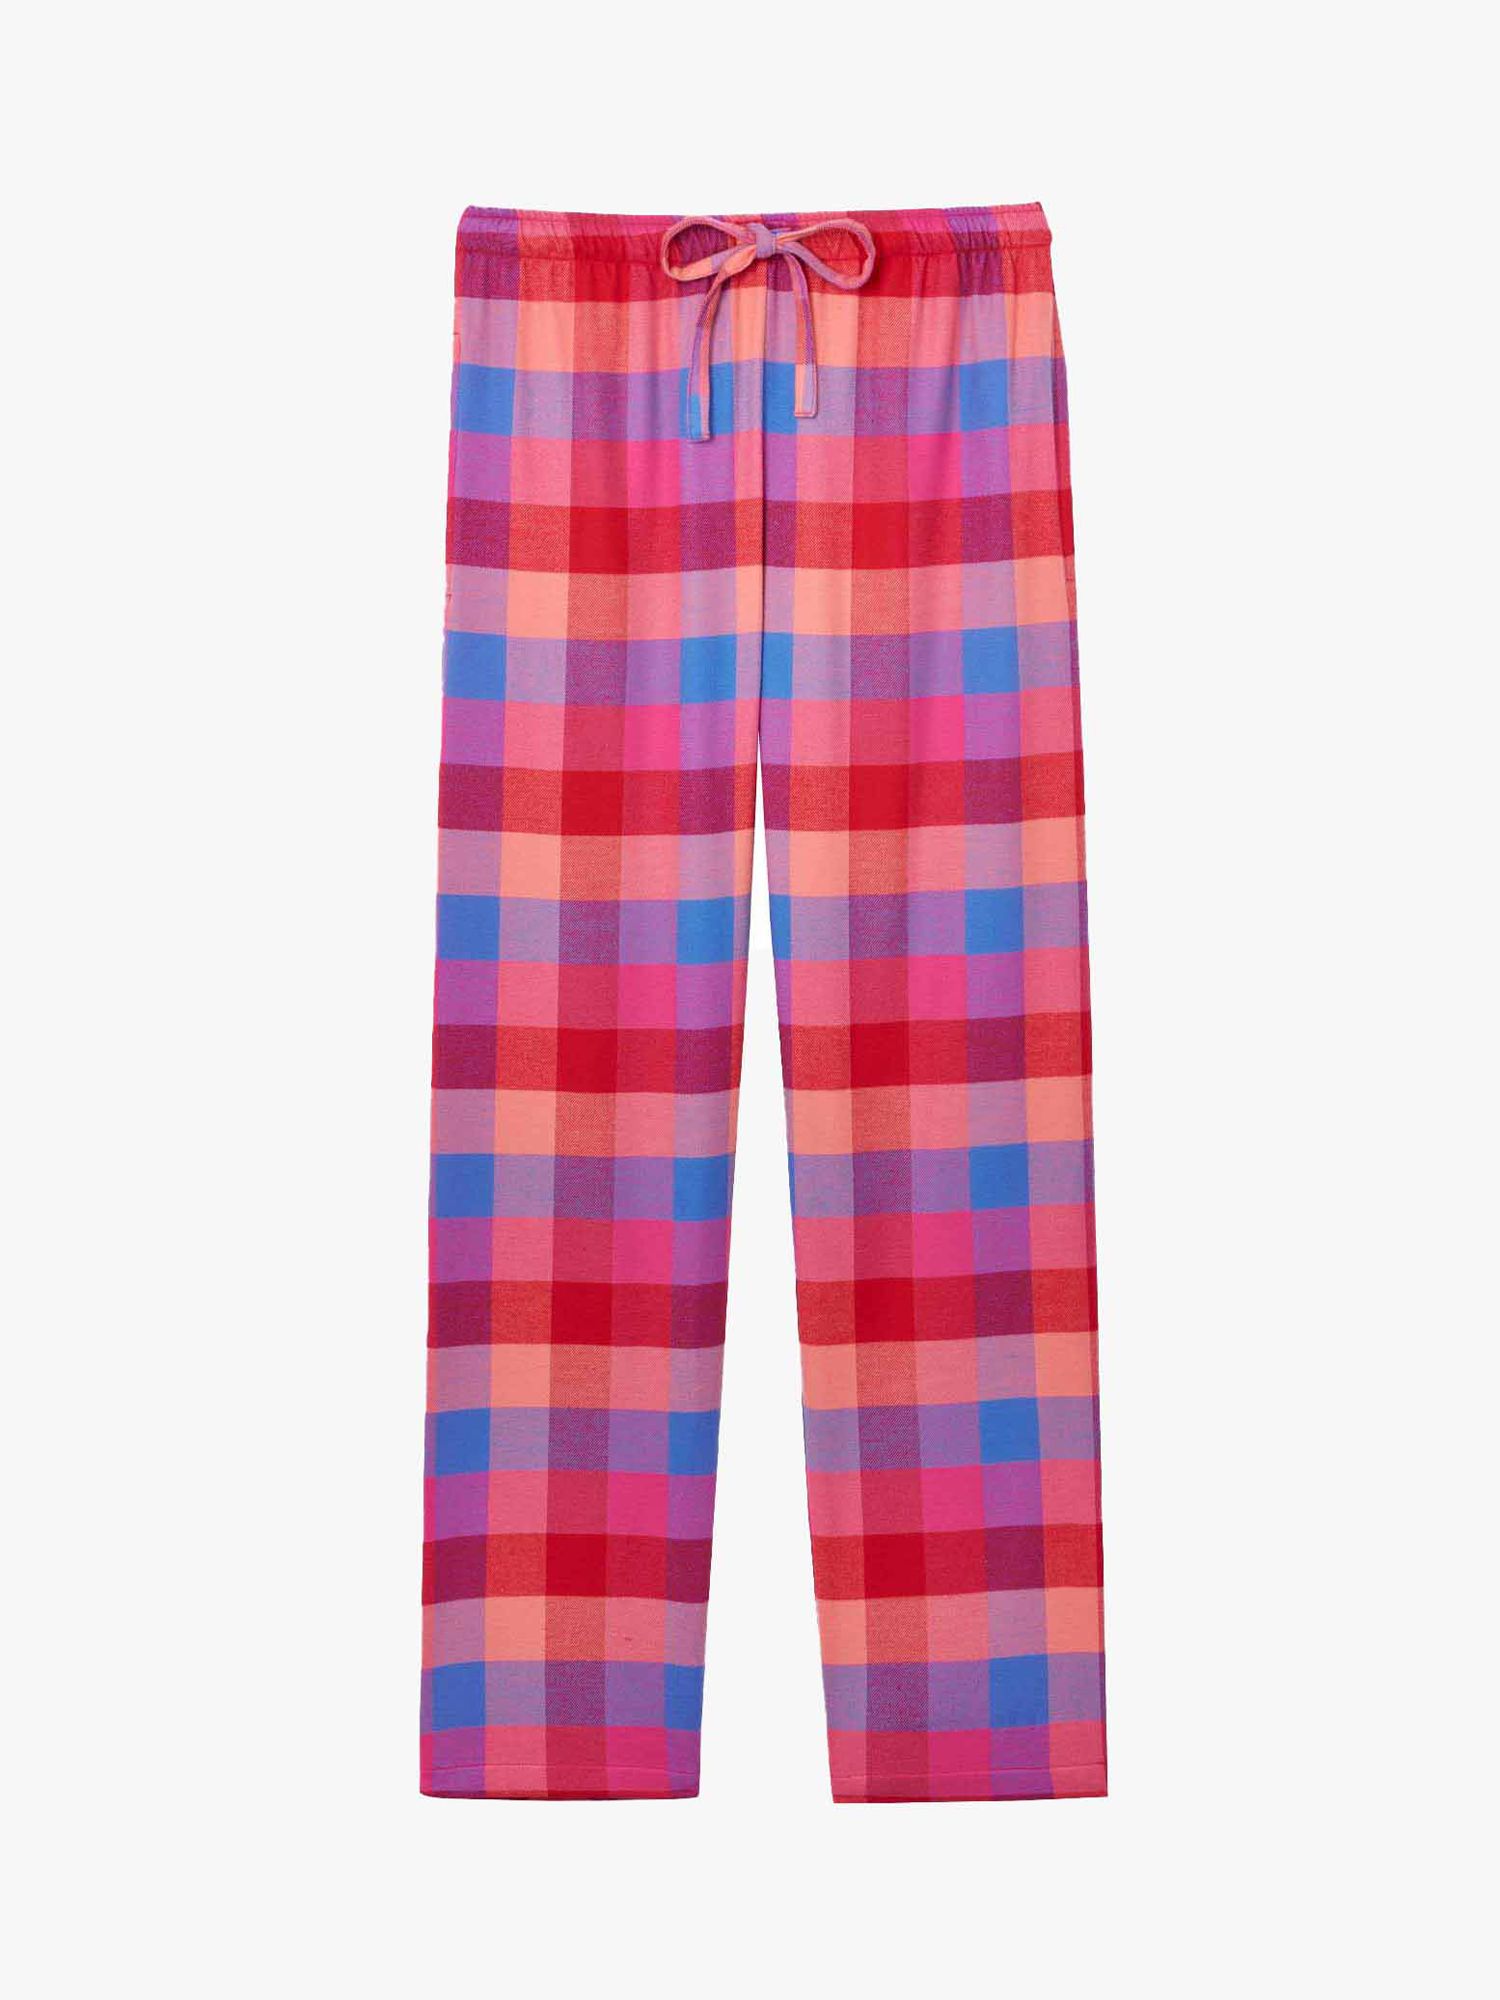 Buy British Boxers Shire Square Brushed Cotton Pyjama Trousers Online at johnlewis.com